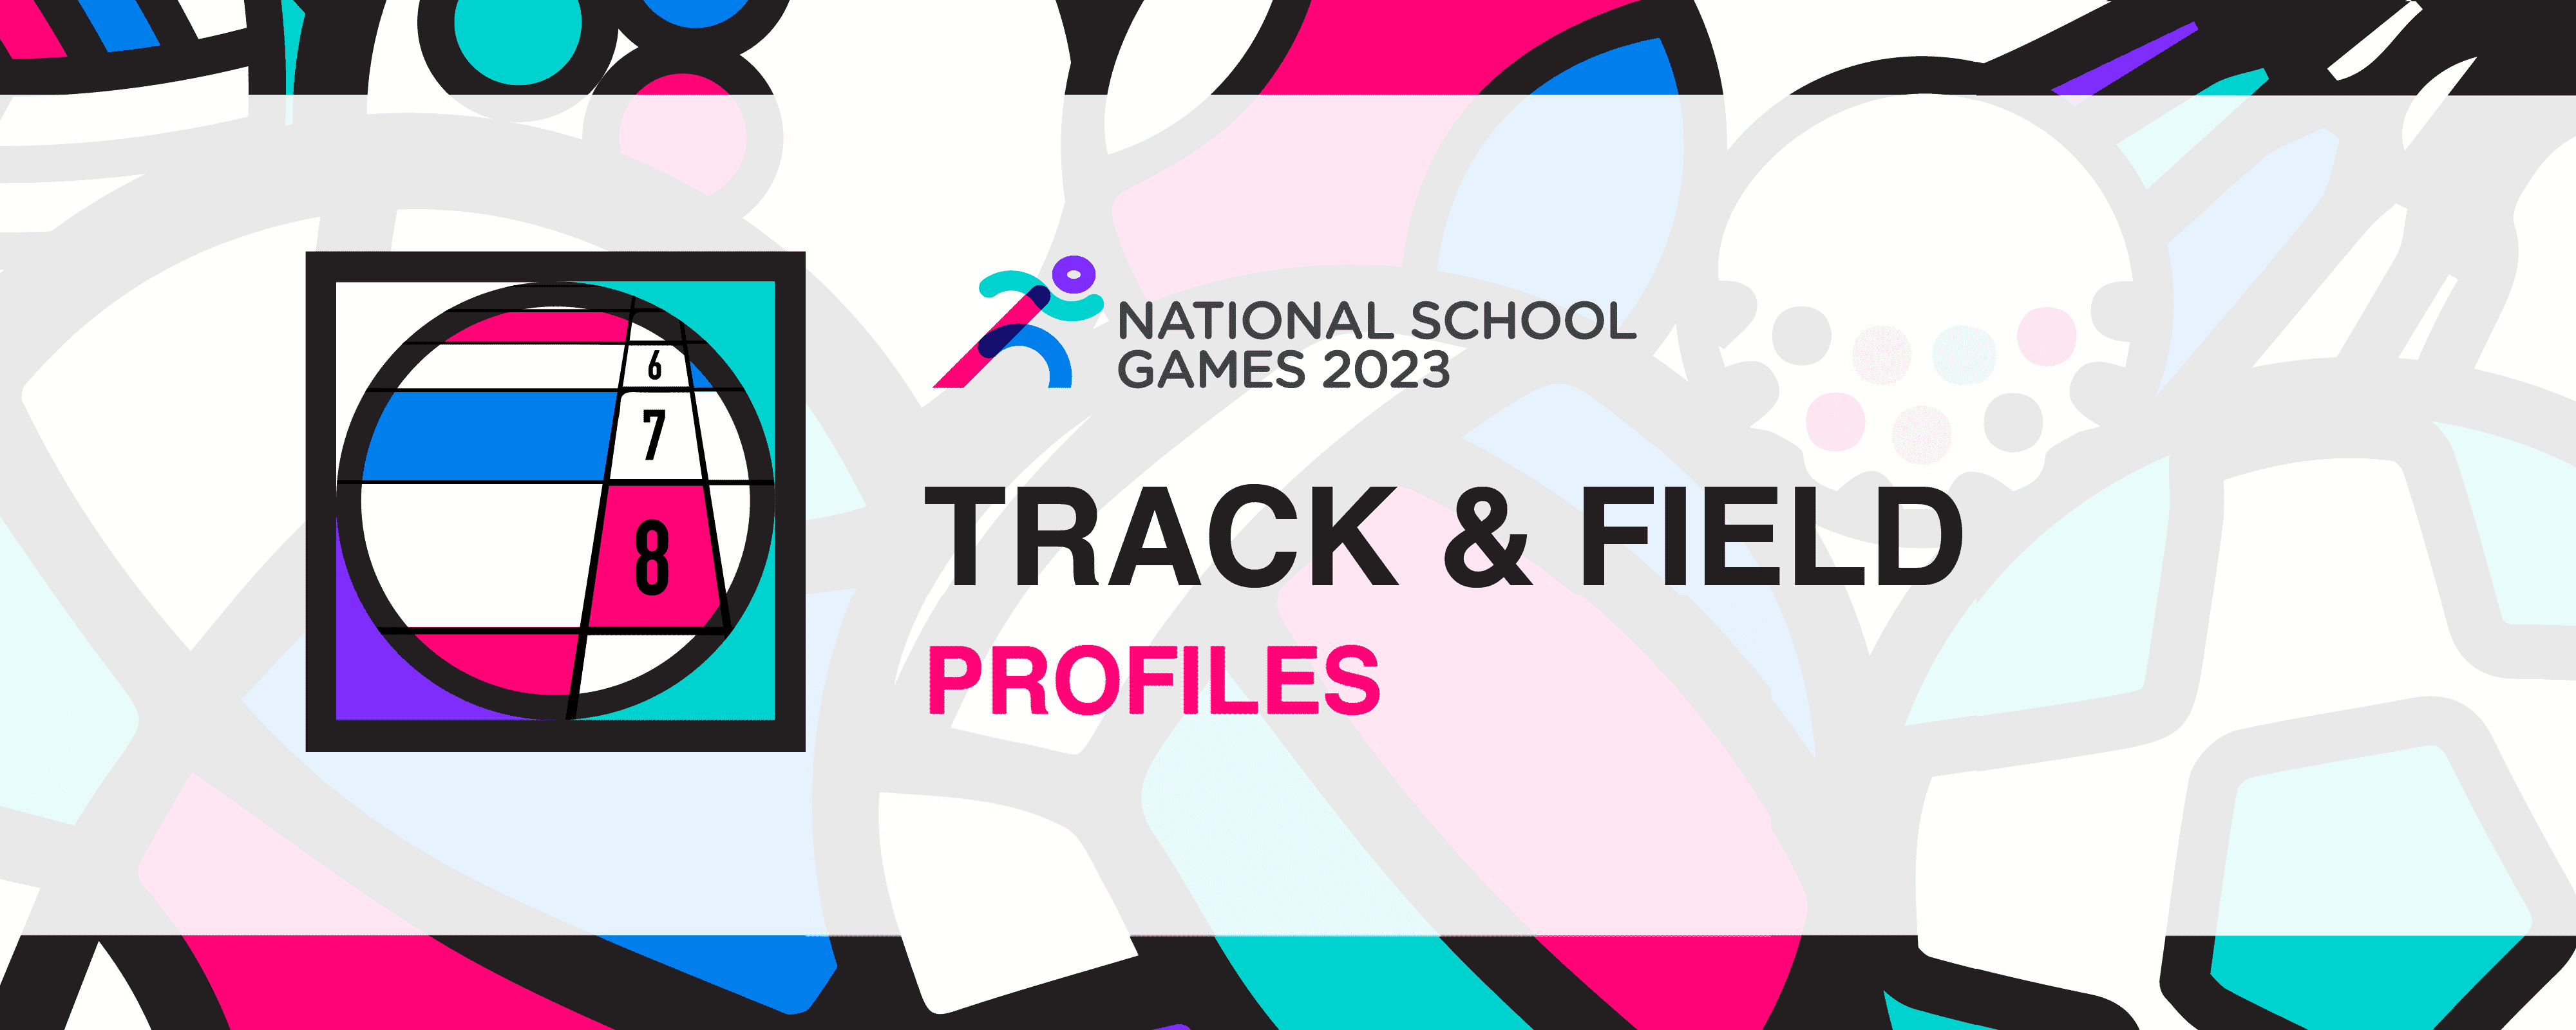 National School Games 2023 | Track & Field | Profile